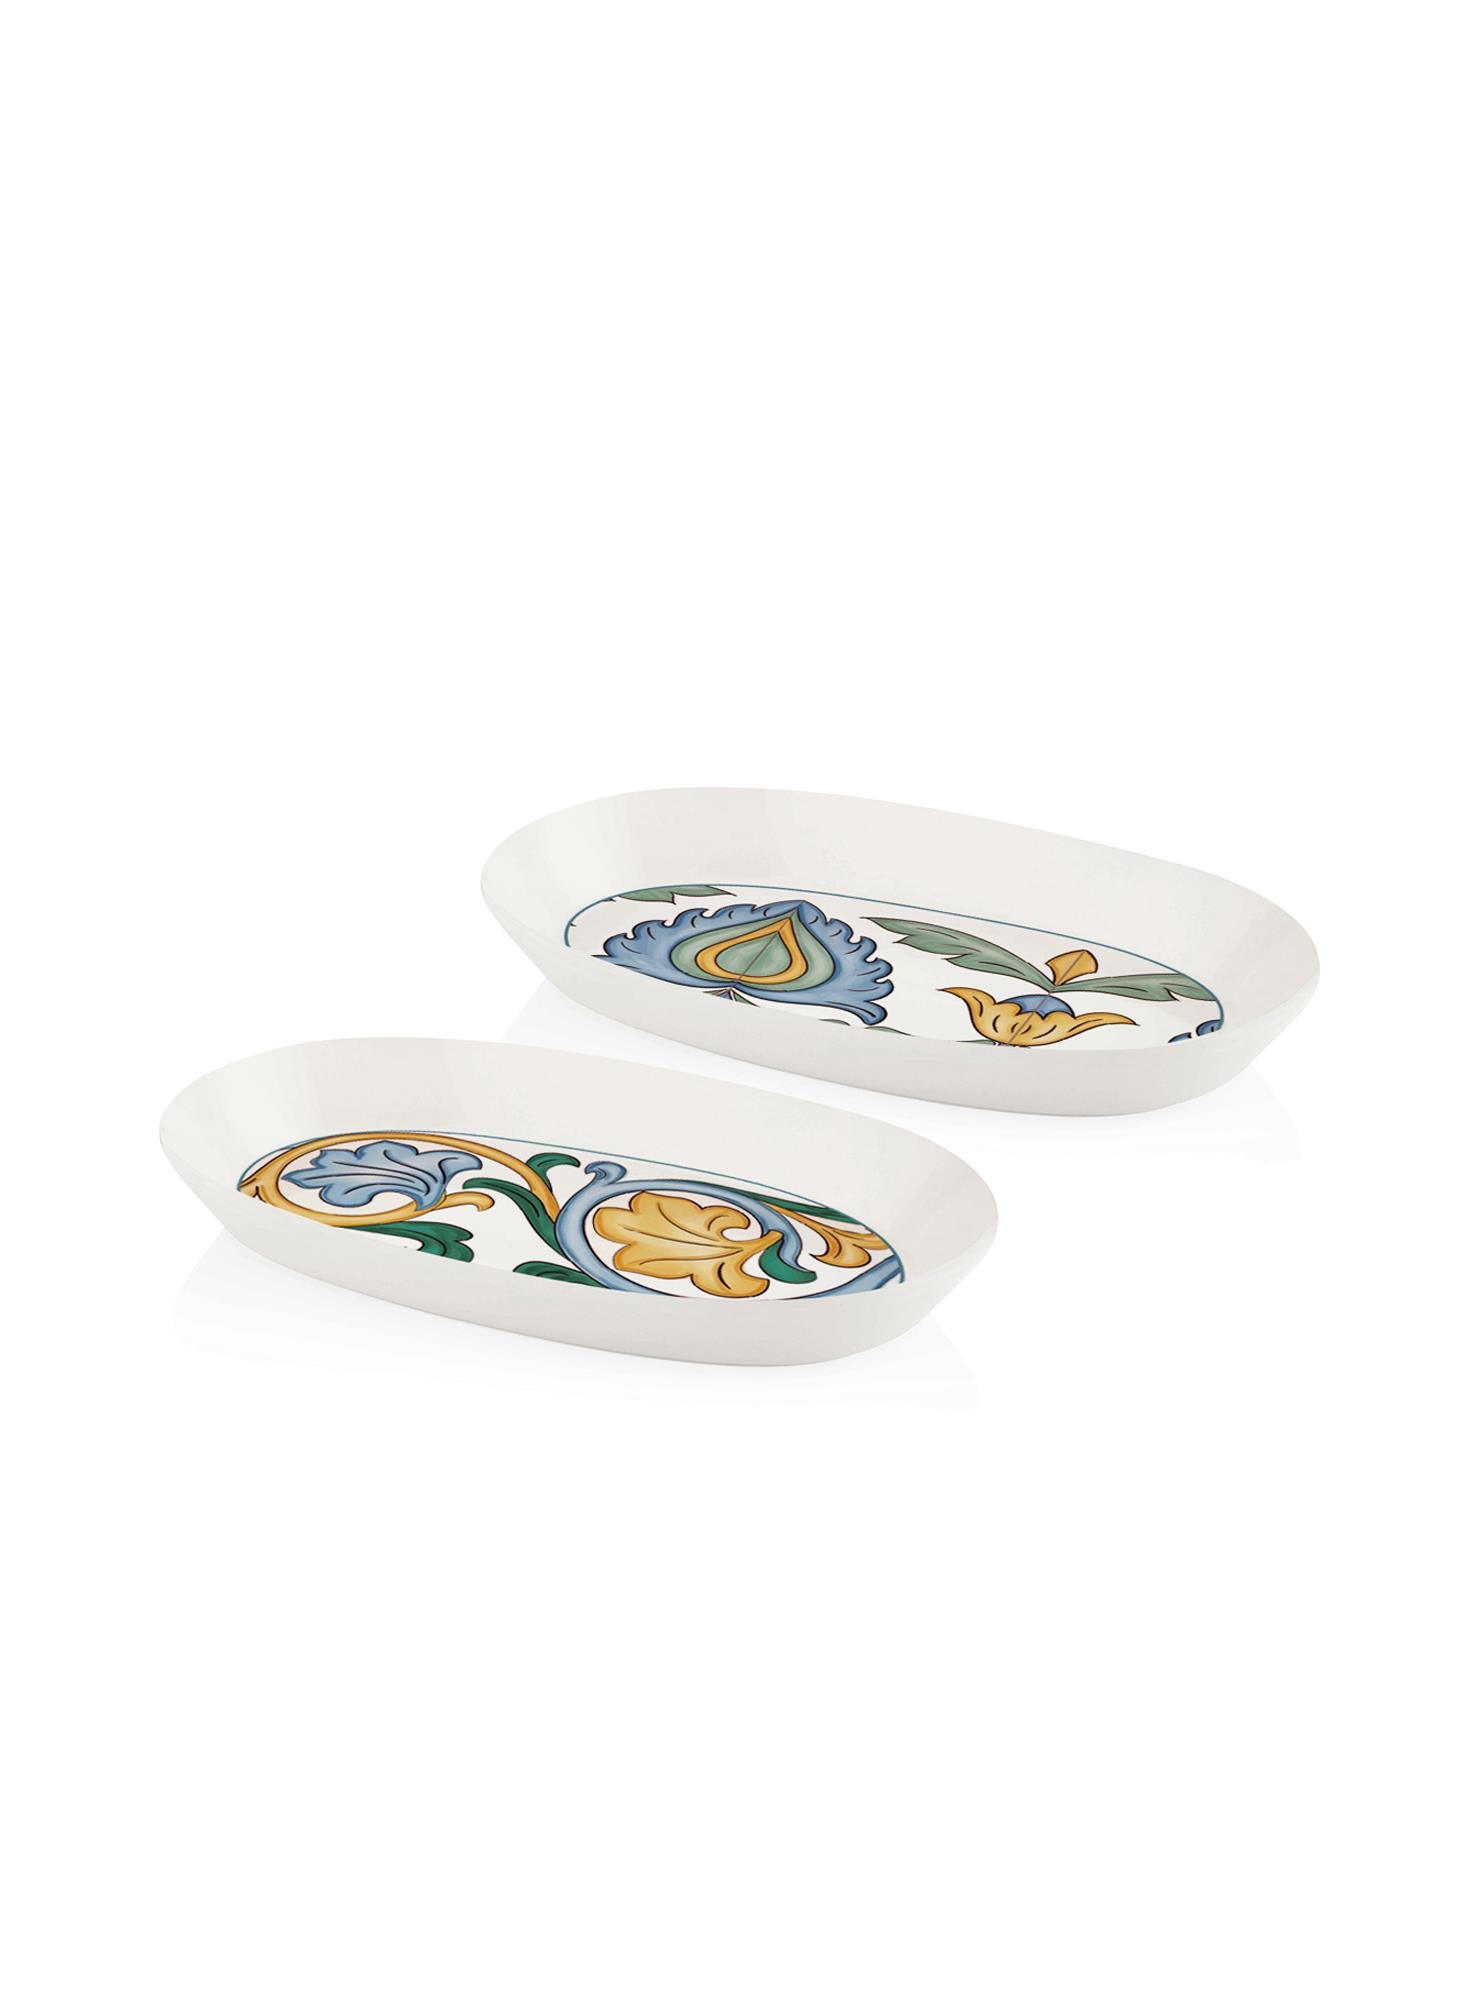 Limoncello Oval Serving Set of 2 Gray 26 cm